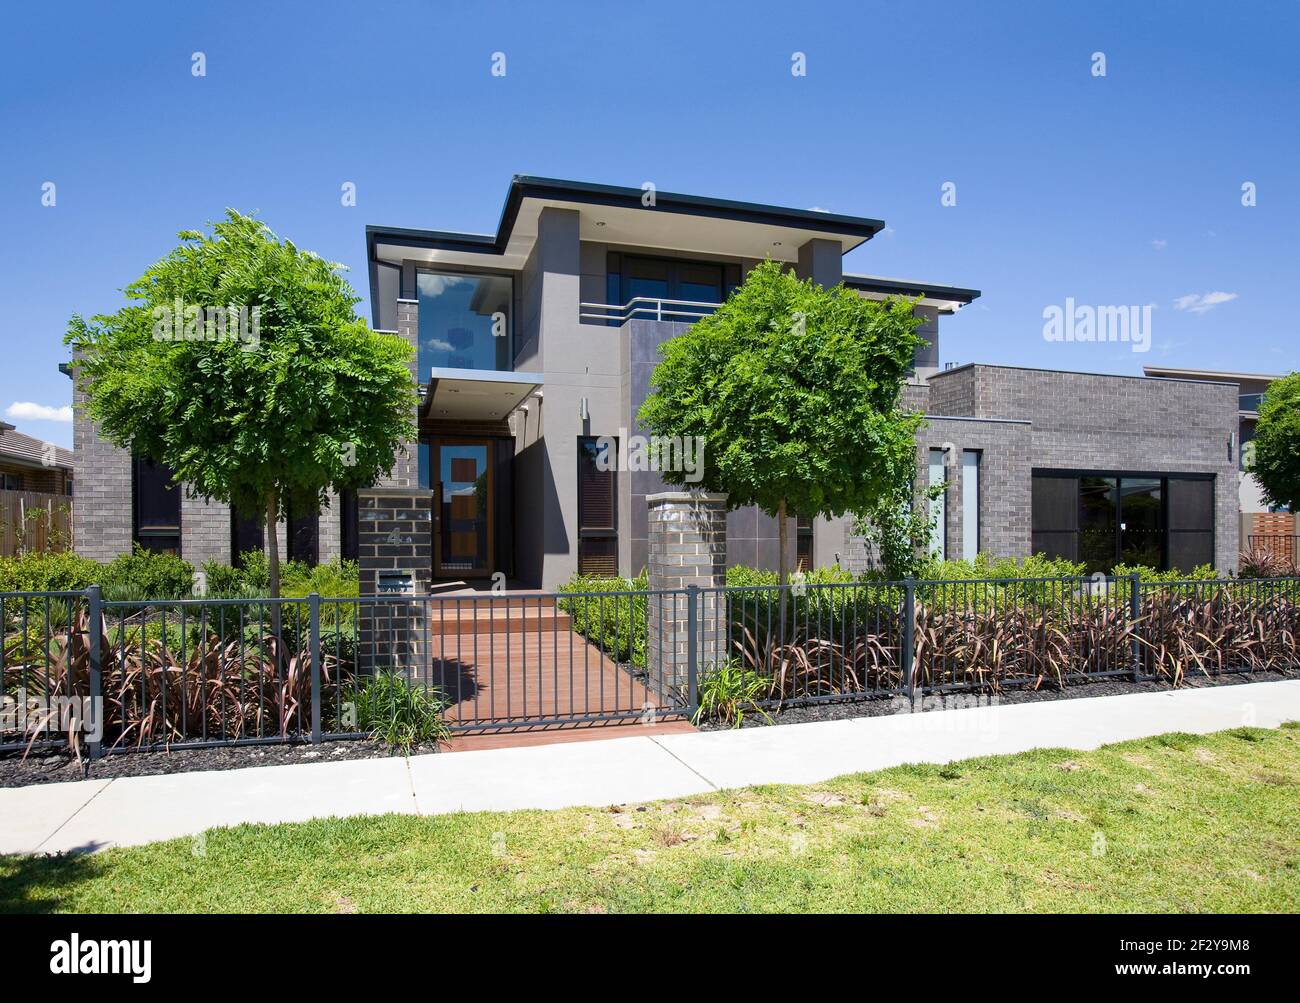 Street view of modern house with mop-top ornamental trees Stock Photo